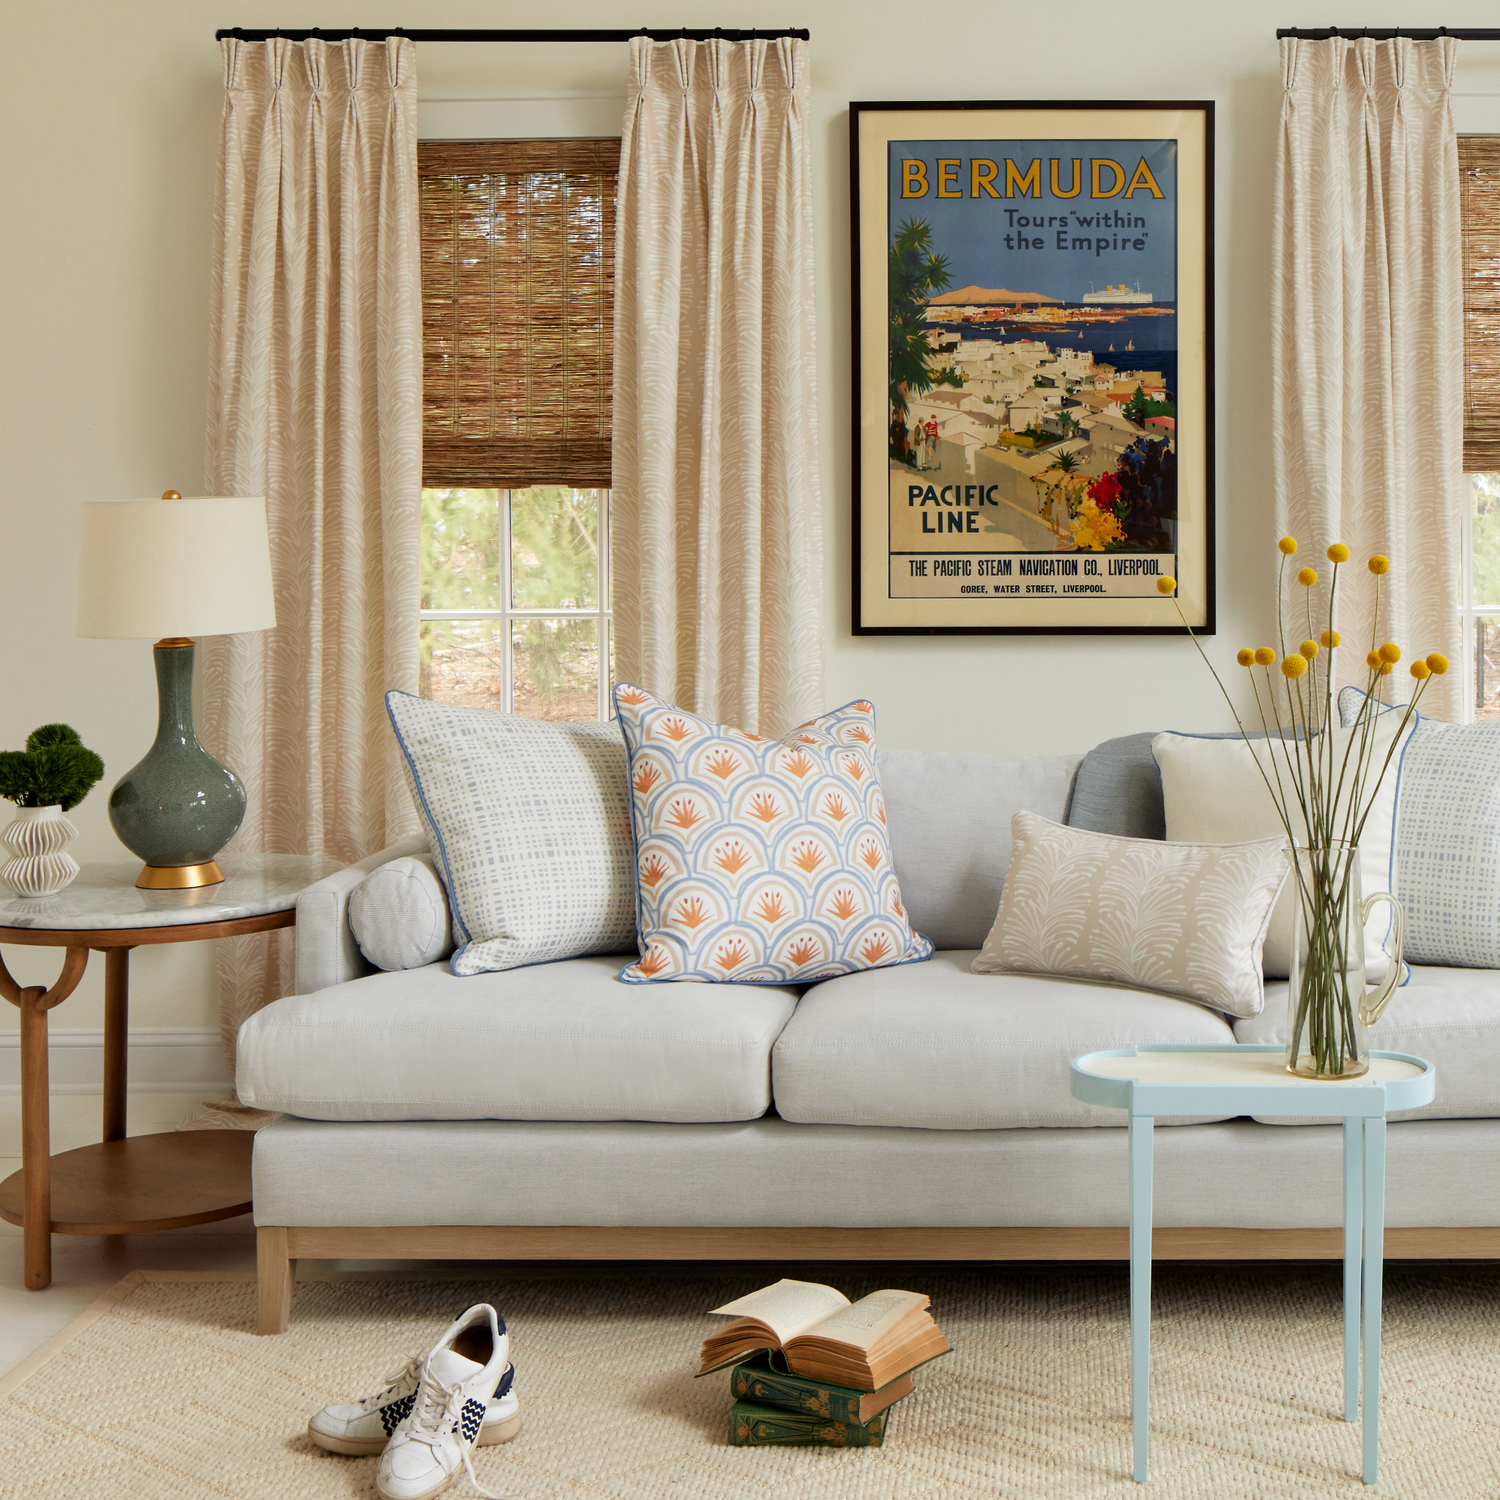 Living room styled with two sky blue gingham printed pillows, Art Deco Palm Pattern Printed Pillow, Beige Botanical Stripe Printed Lumbar, and Light brown Pillow on top of grey couch with Beige Botanical Stripe set of two curtains, books stacked on floor by pair of white tennis shoes and blue and white circular table with yellow flowers in clear vase.